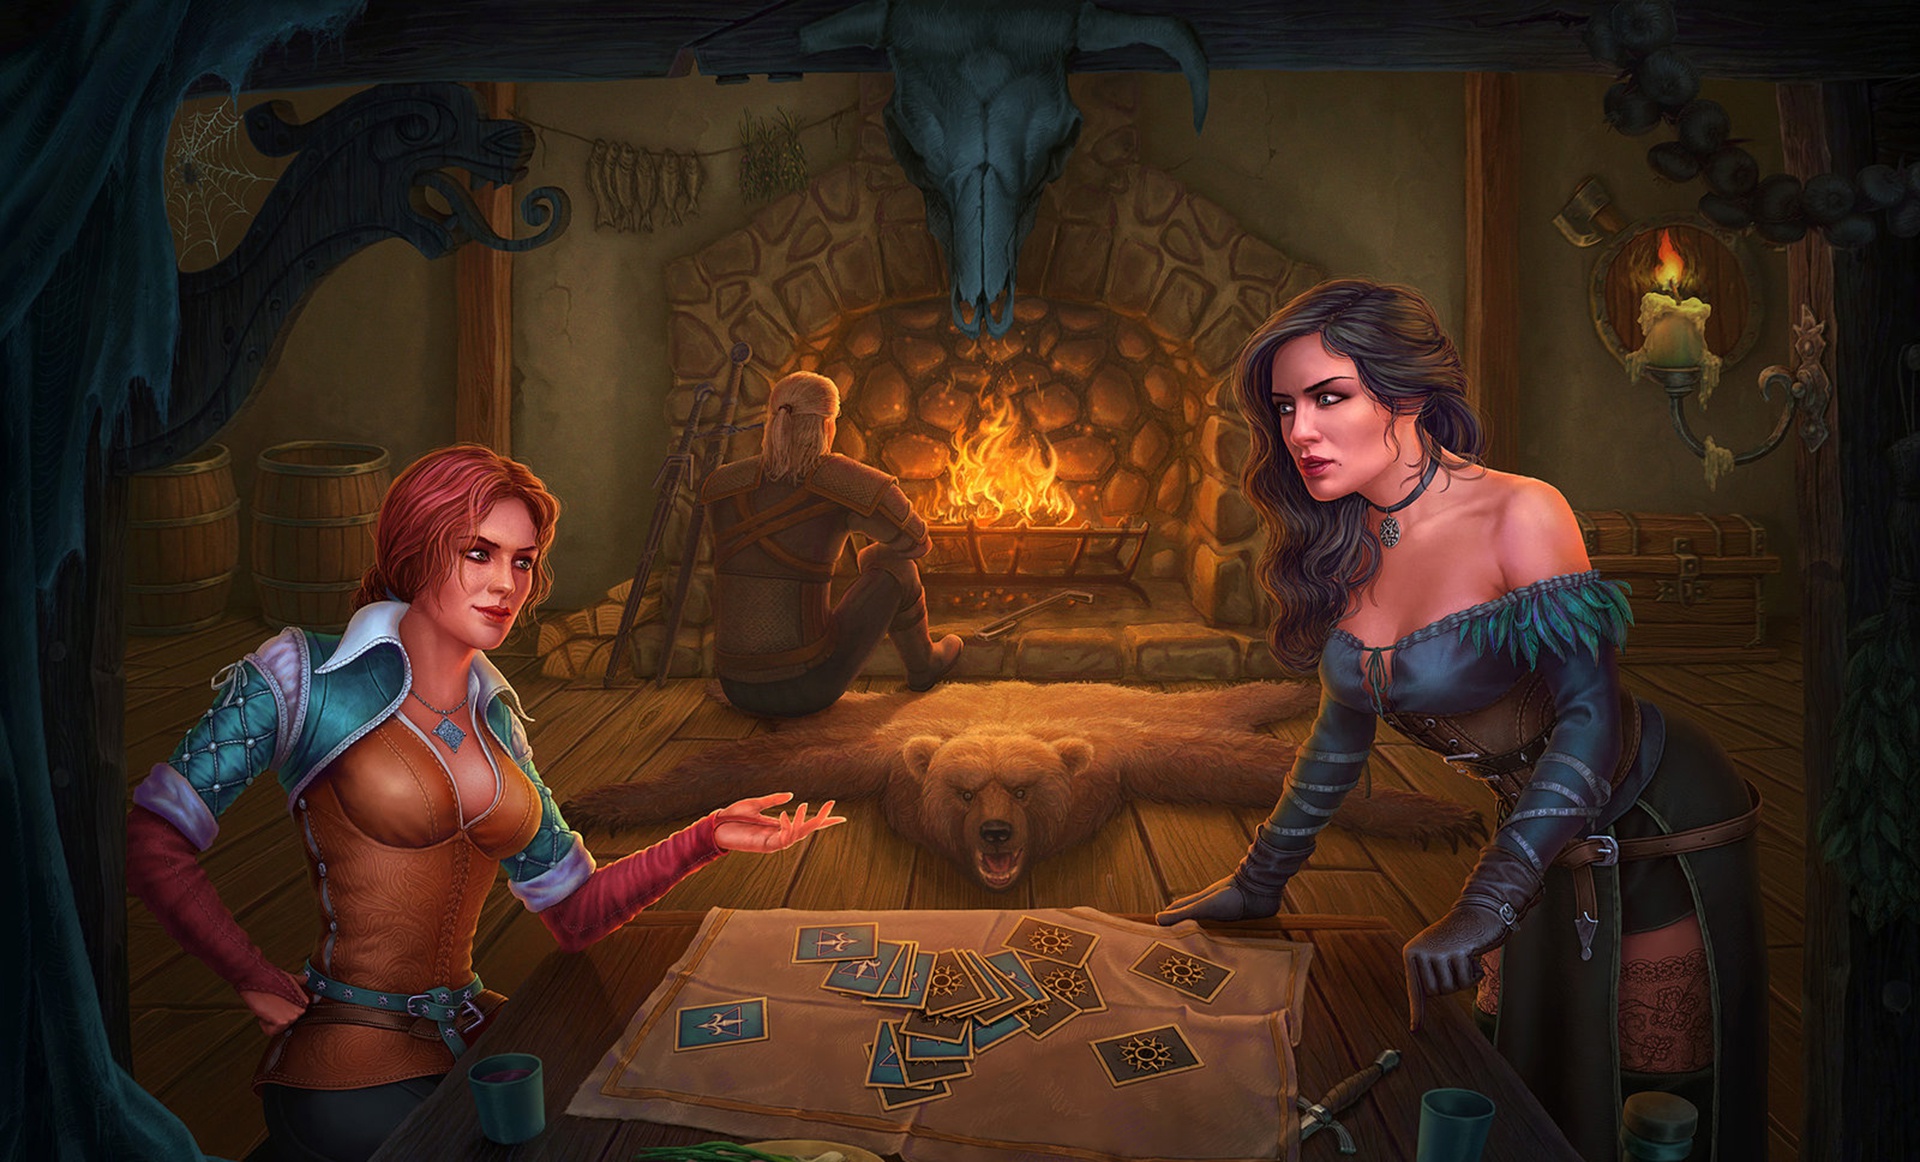 General 1920x1162 video games The Witcher 3: Wild Hunt drawing Geralt of Rivia Triss Merigold Yennefer of Vengerberg tavern fireplace two women cardboard women indoors The Witcher sorceress Gwent